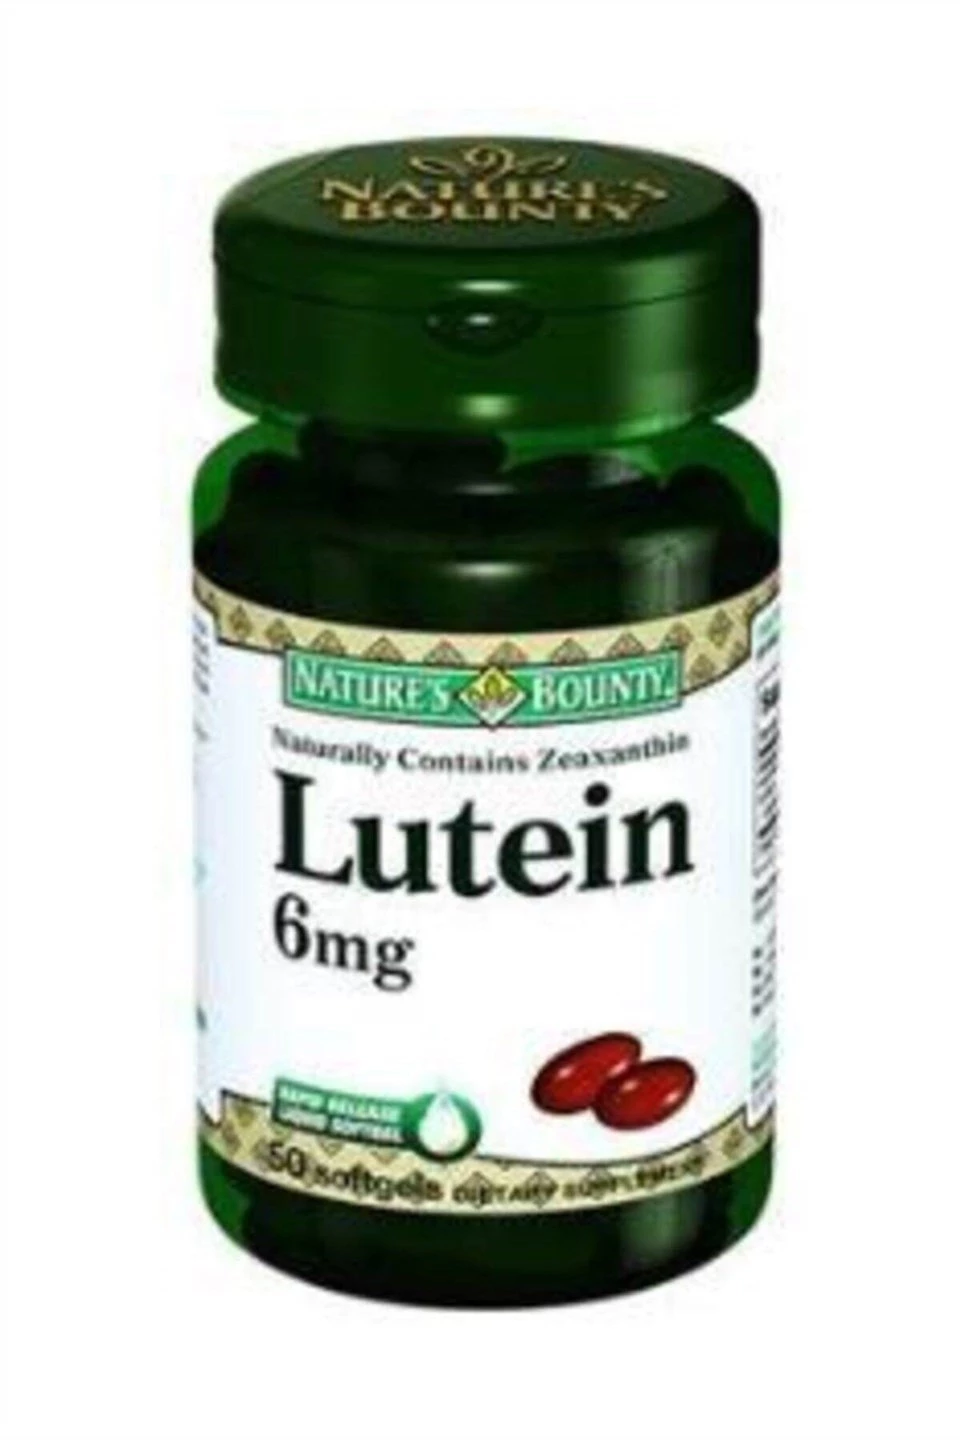 Natures Bounty Lutein 6 mg 50 Softgels